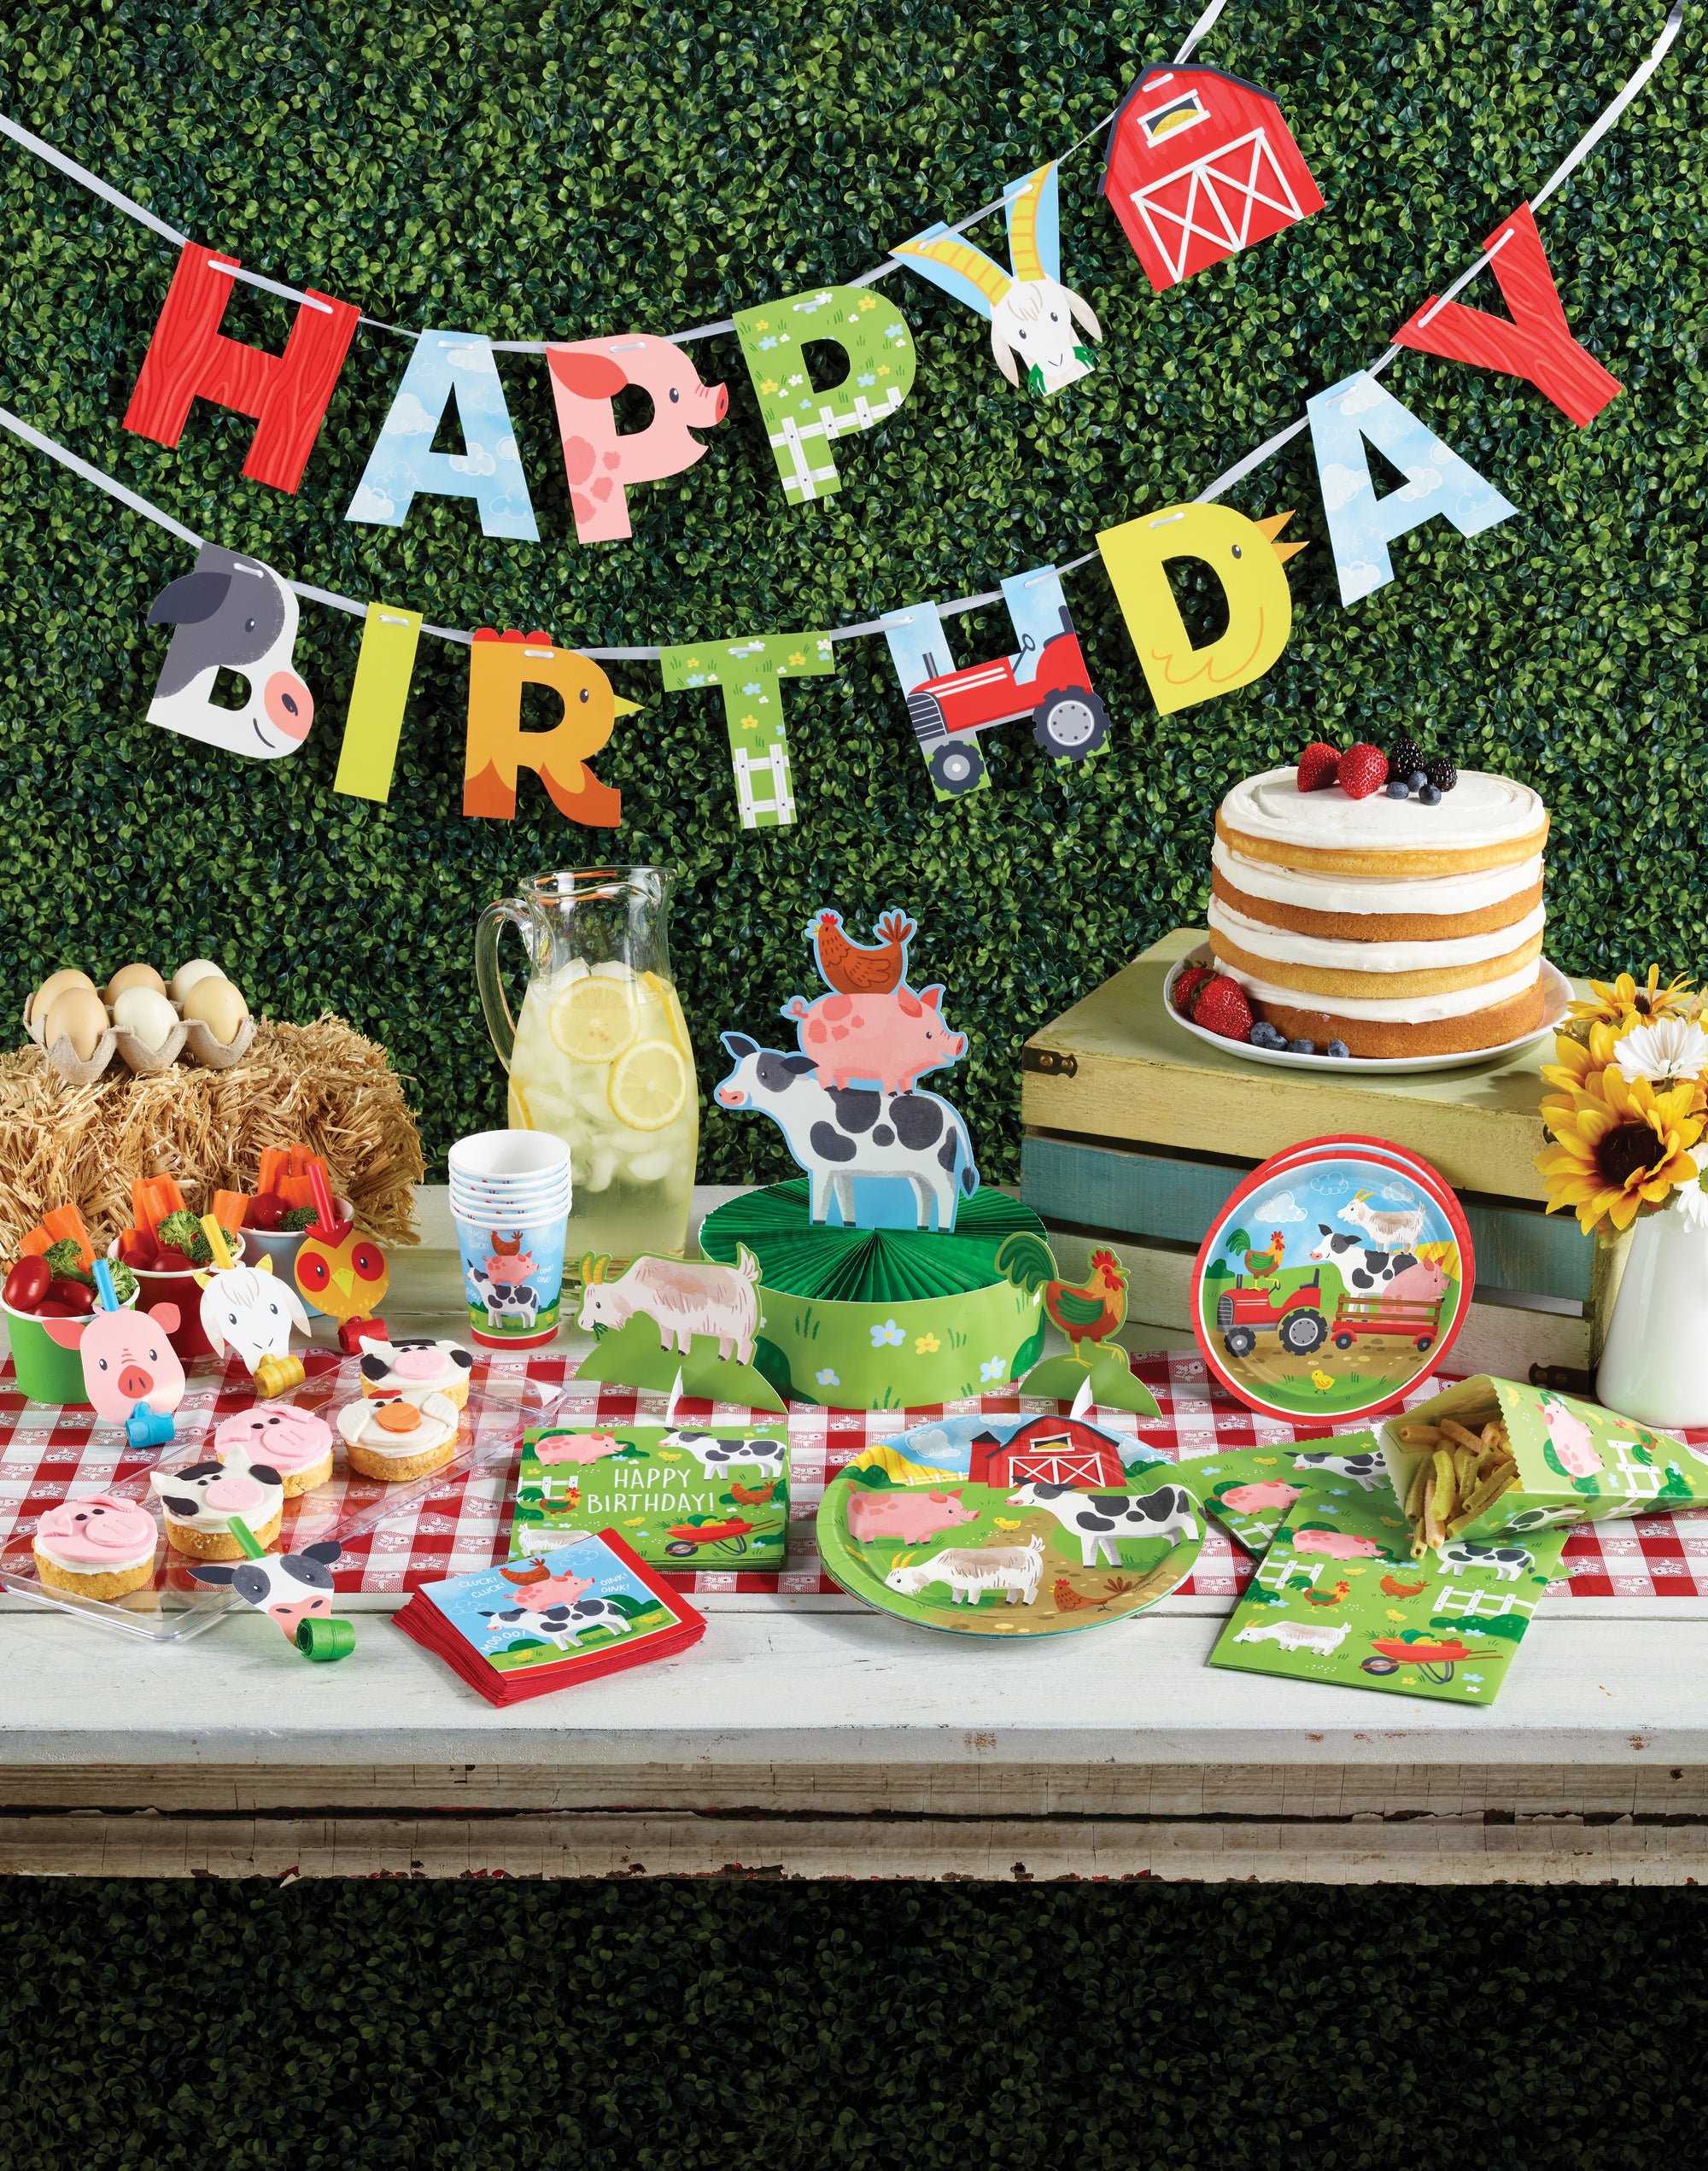 Farm Animals Dessert Plates 8ct | The Party Darling